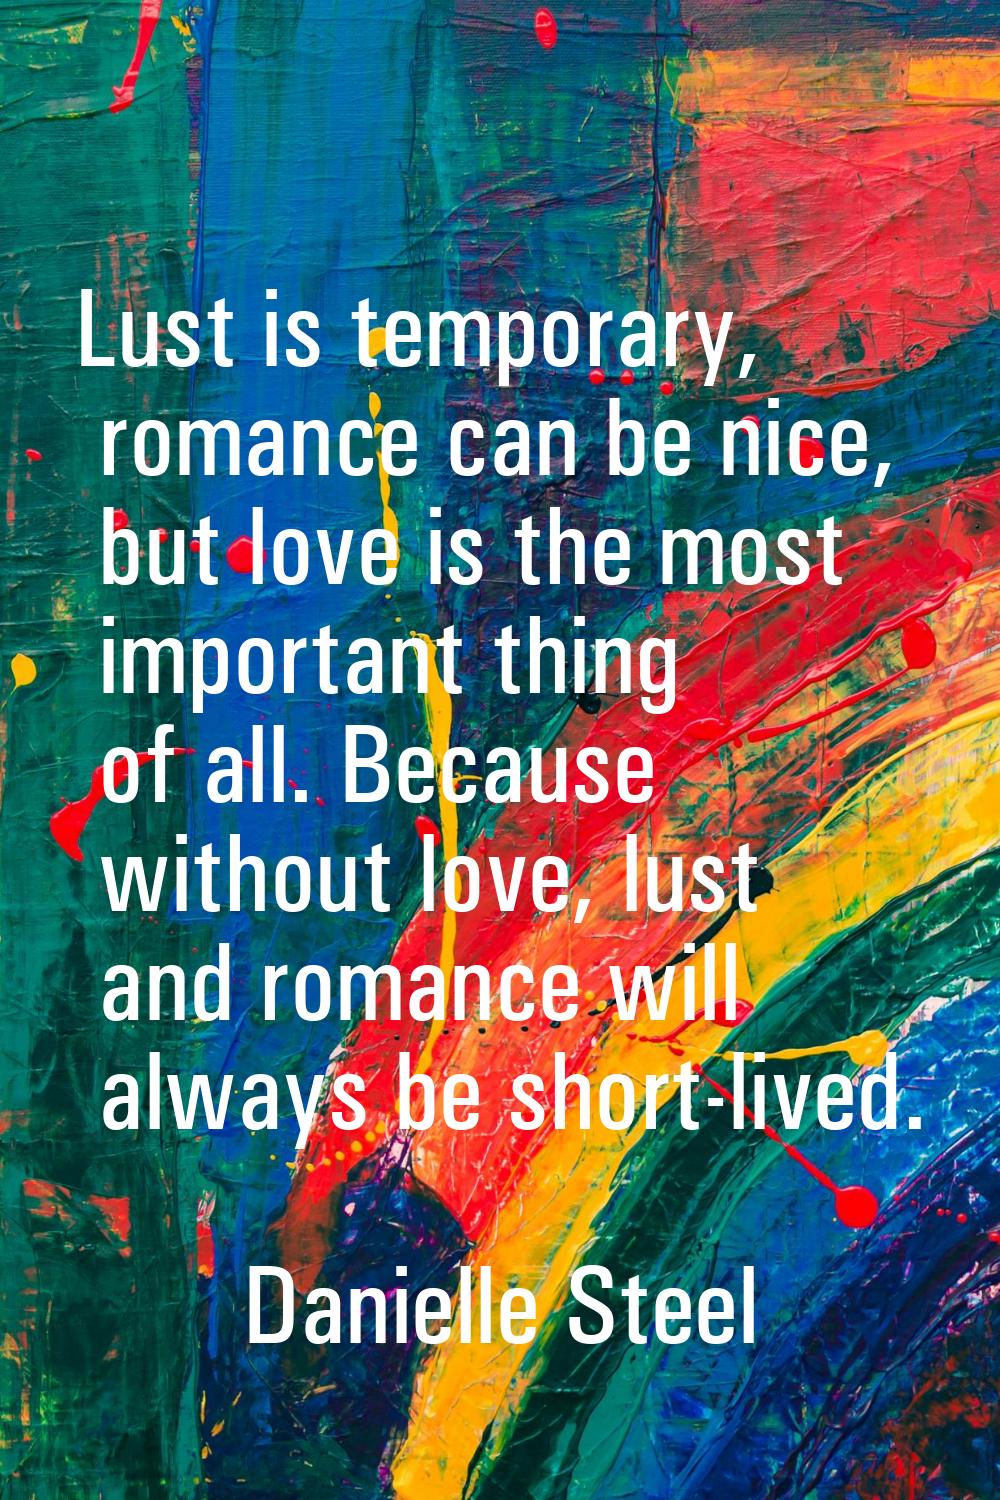 Lust is temporary, romance can be nice, but love is the most important thing of all. Because withou